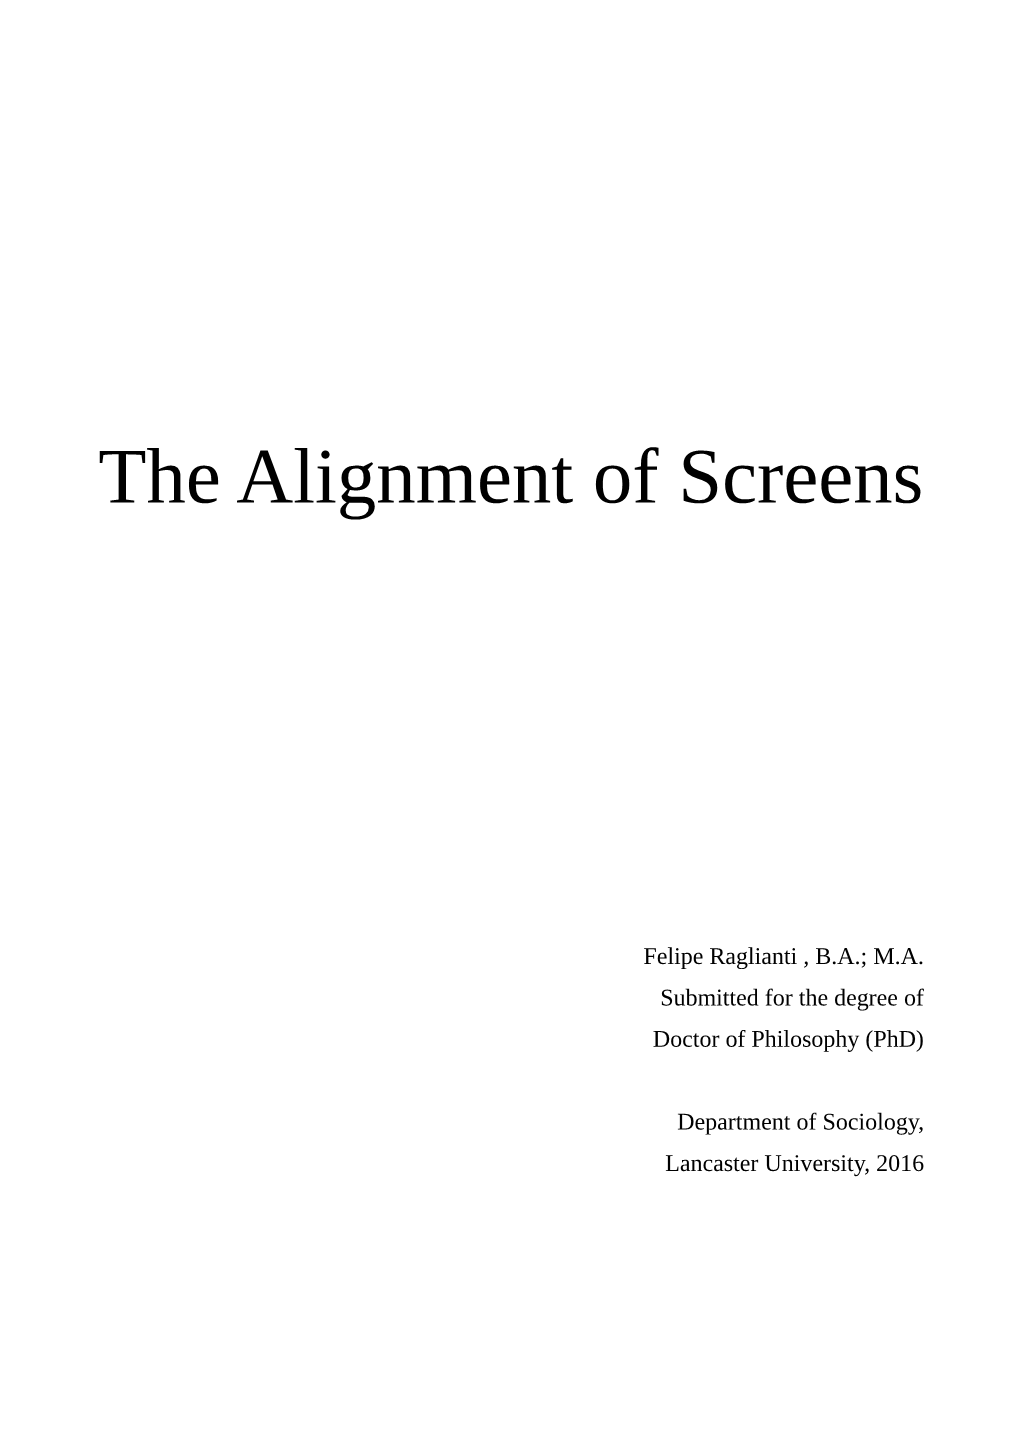 The Alignment of Screens